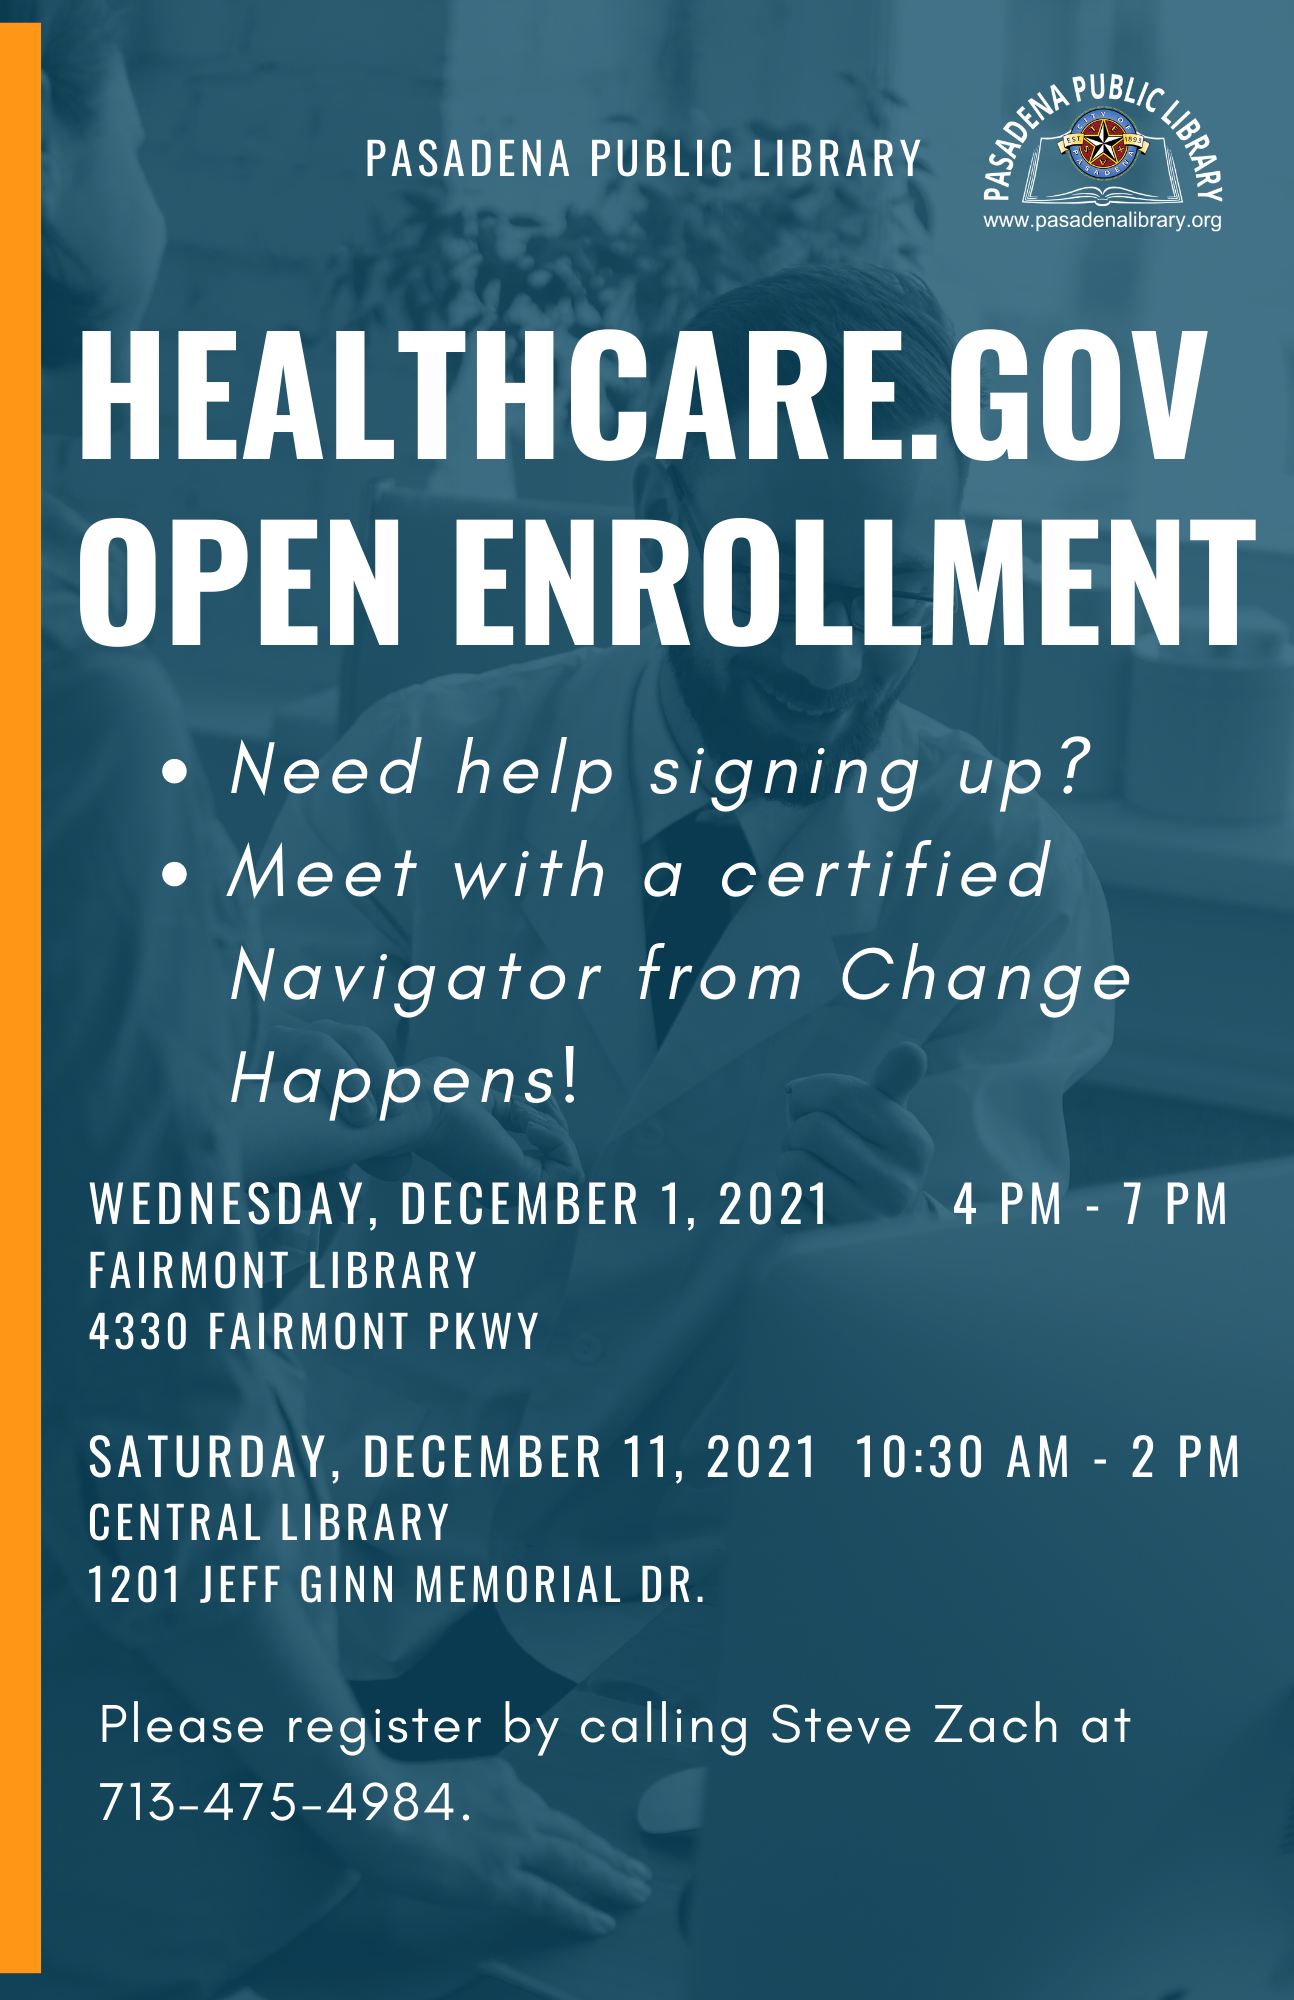 Certified Navigators through Change Happens will be at the Fairmont Library (4330 Fairmont Pkwy.) on Wednesday, December 1 from 4:00 PM to 7:00 PM